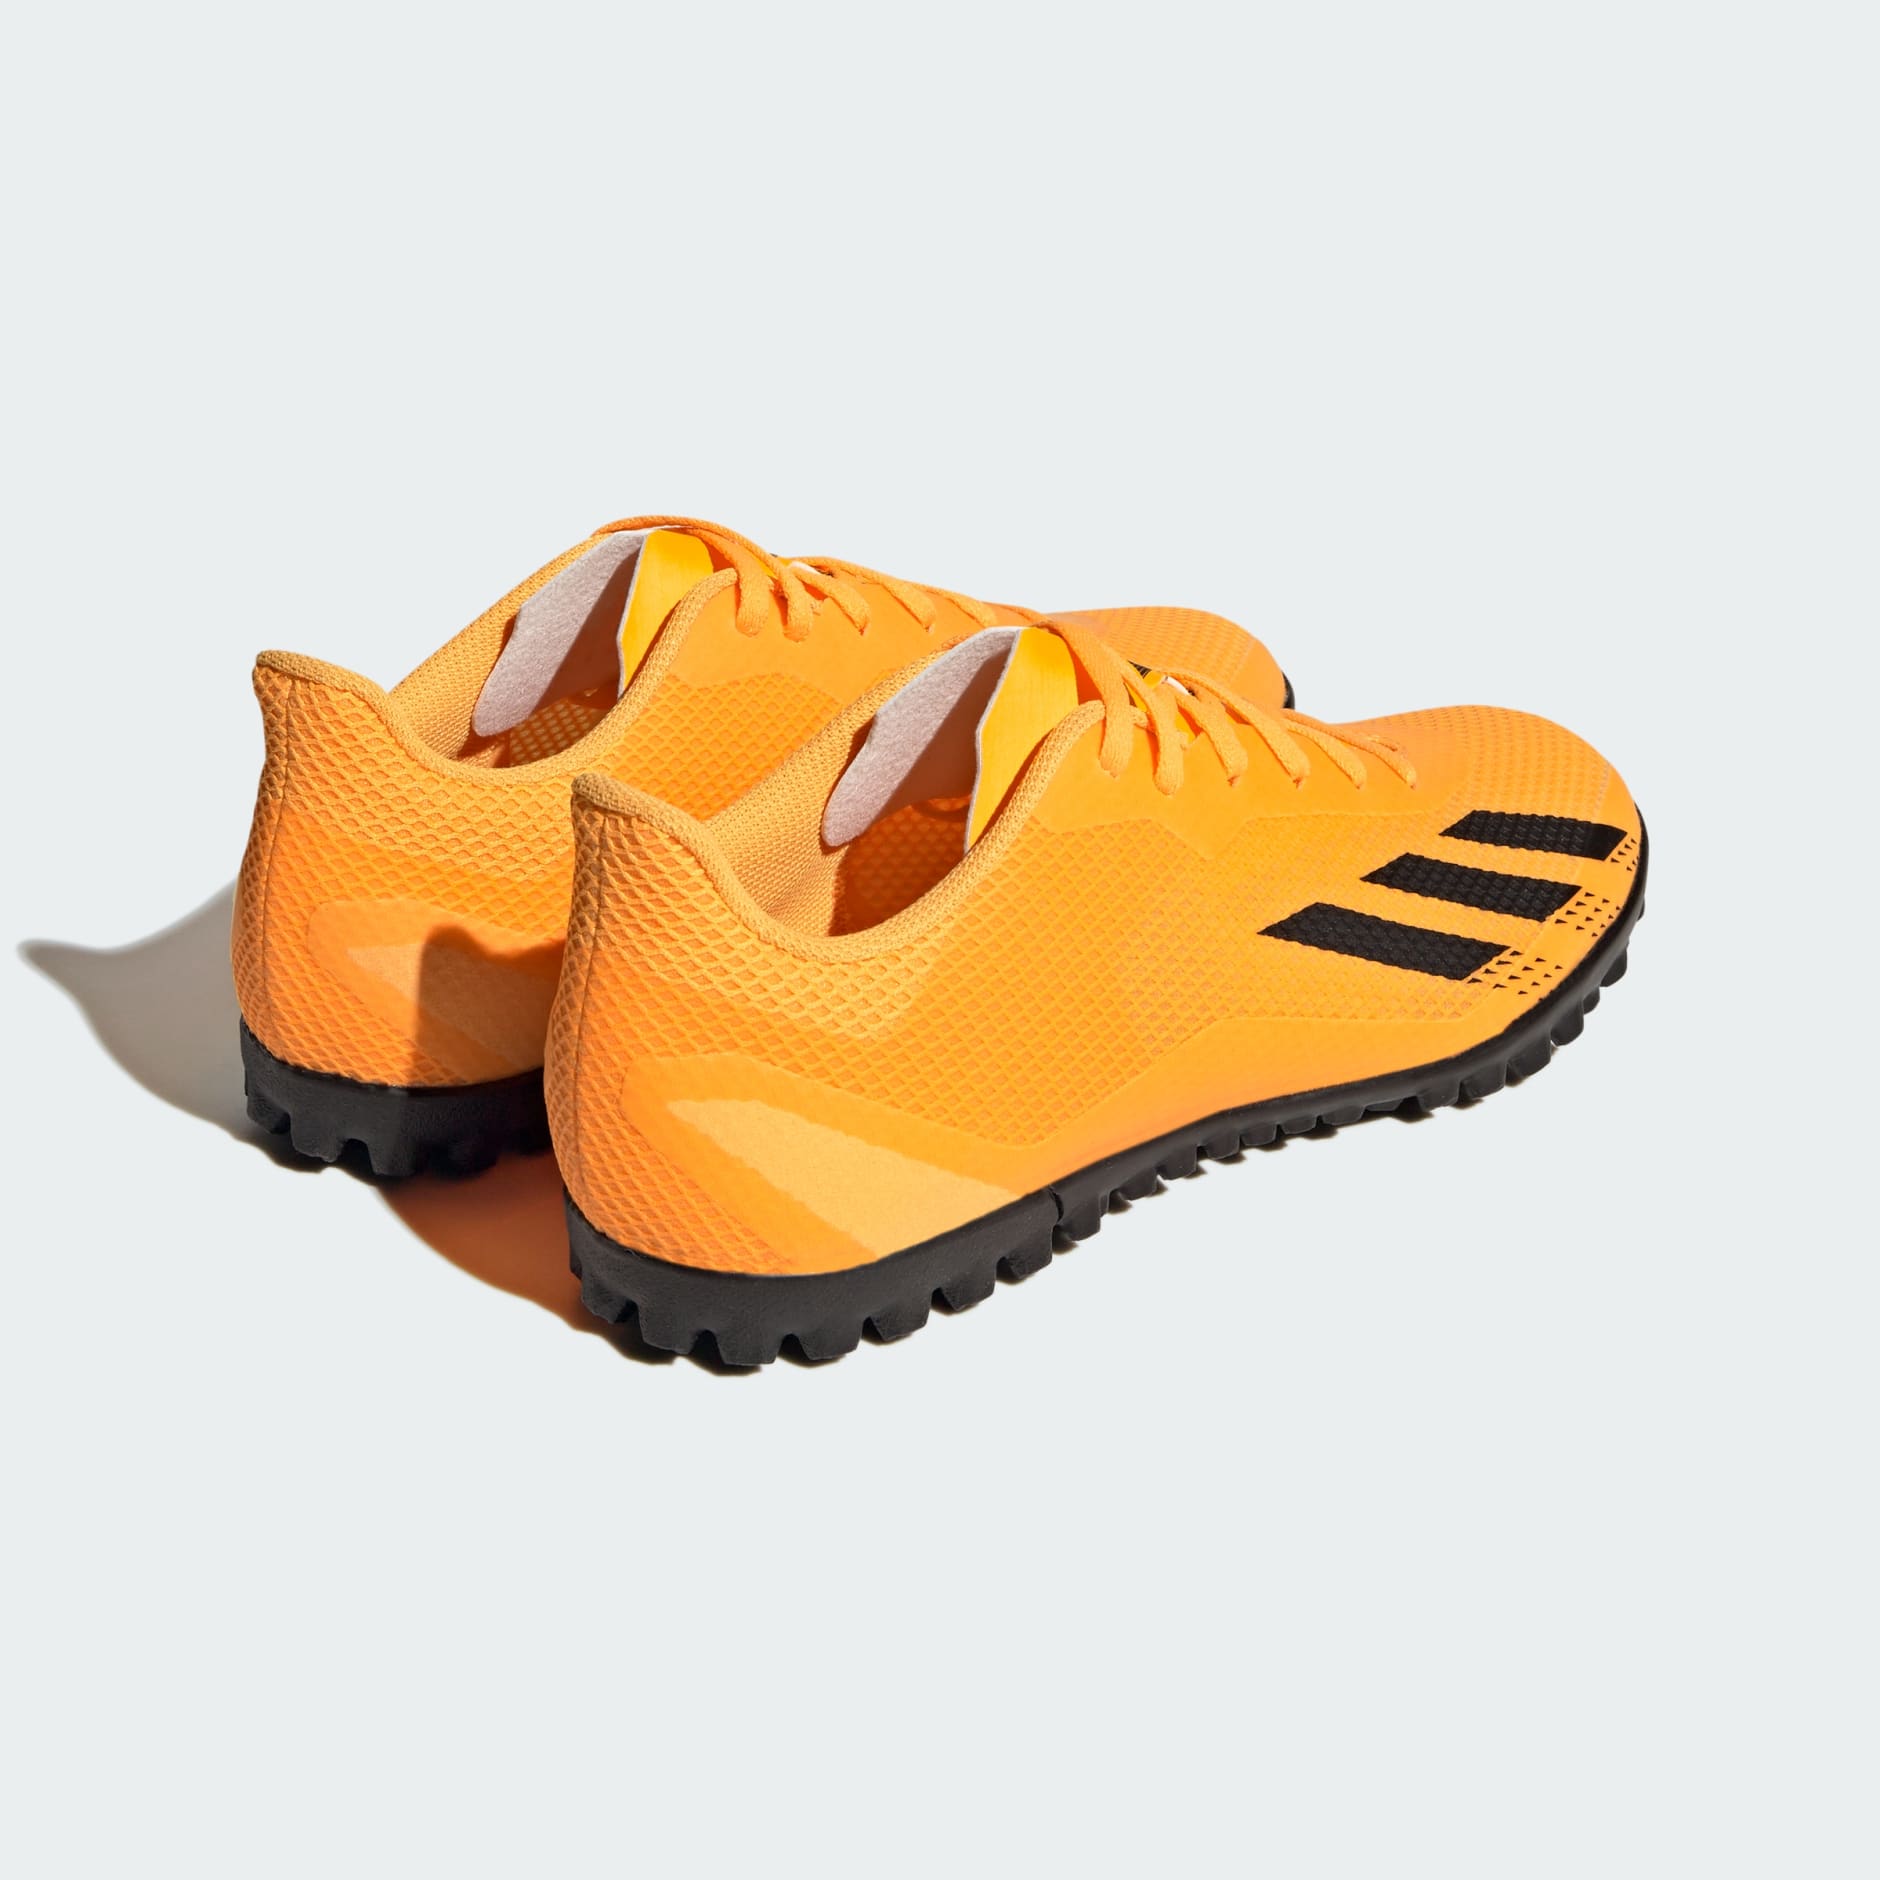 All products - X Speedportal.4 Turf Boots - Gold | adidas South Africa